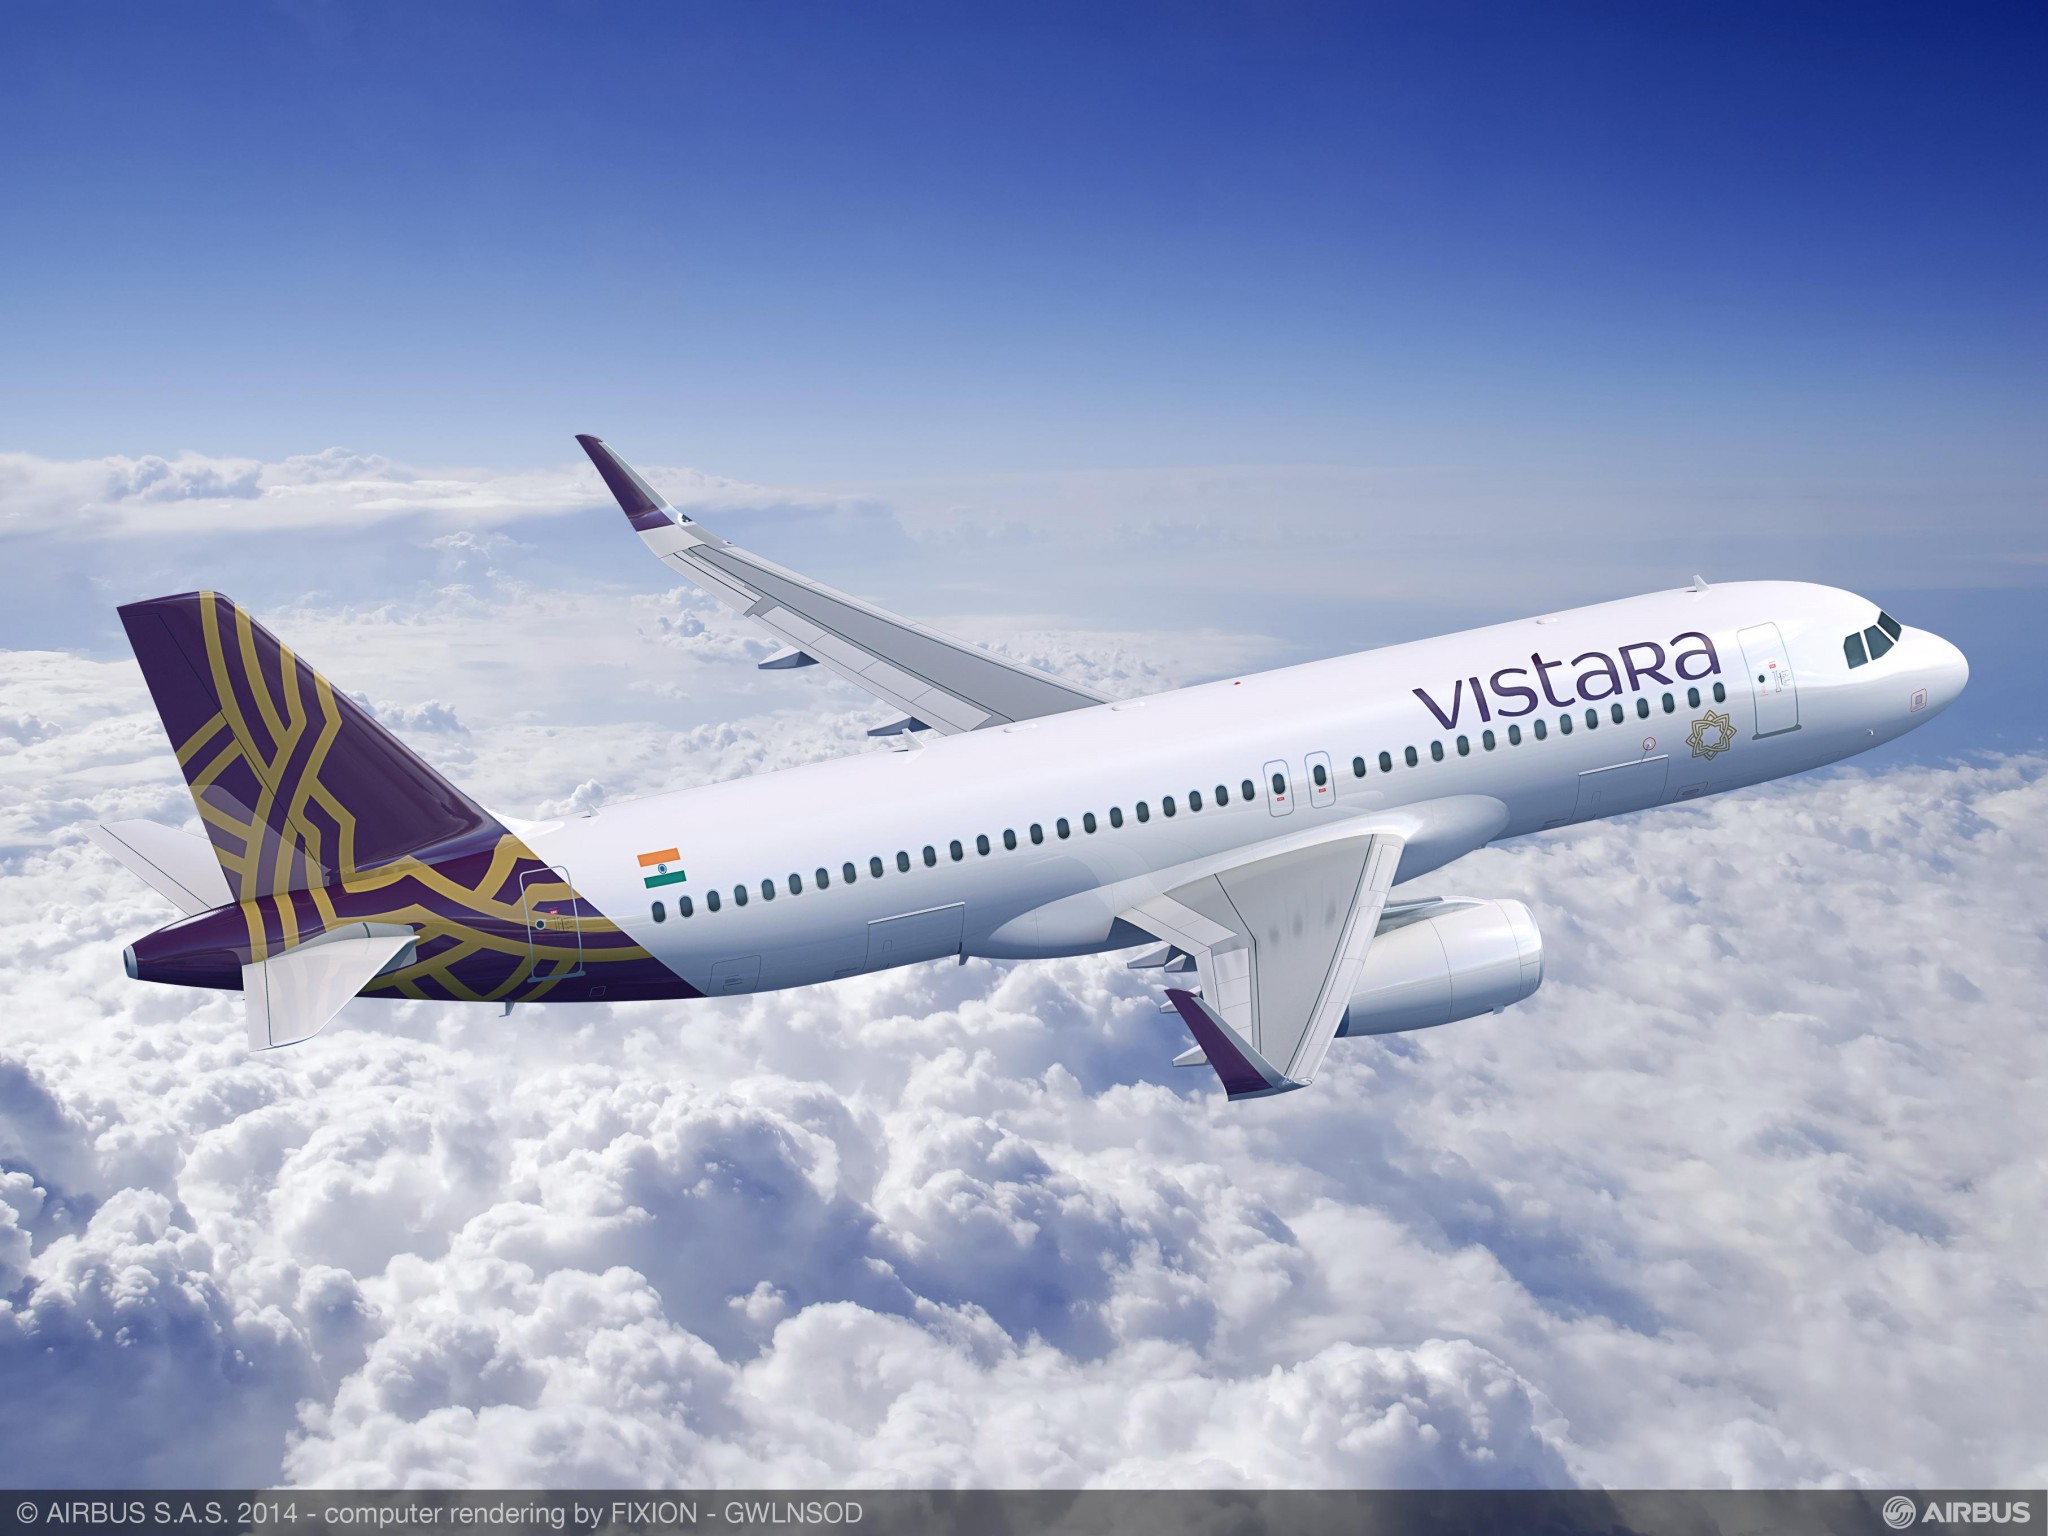 Vistara commits to six 787s and 12 A320neos